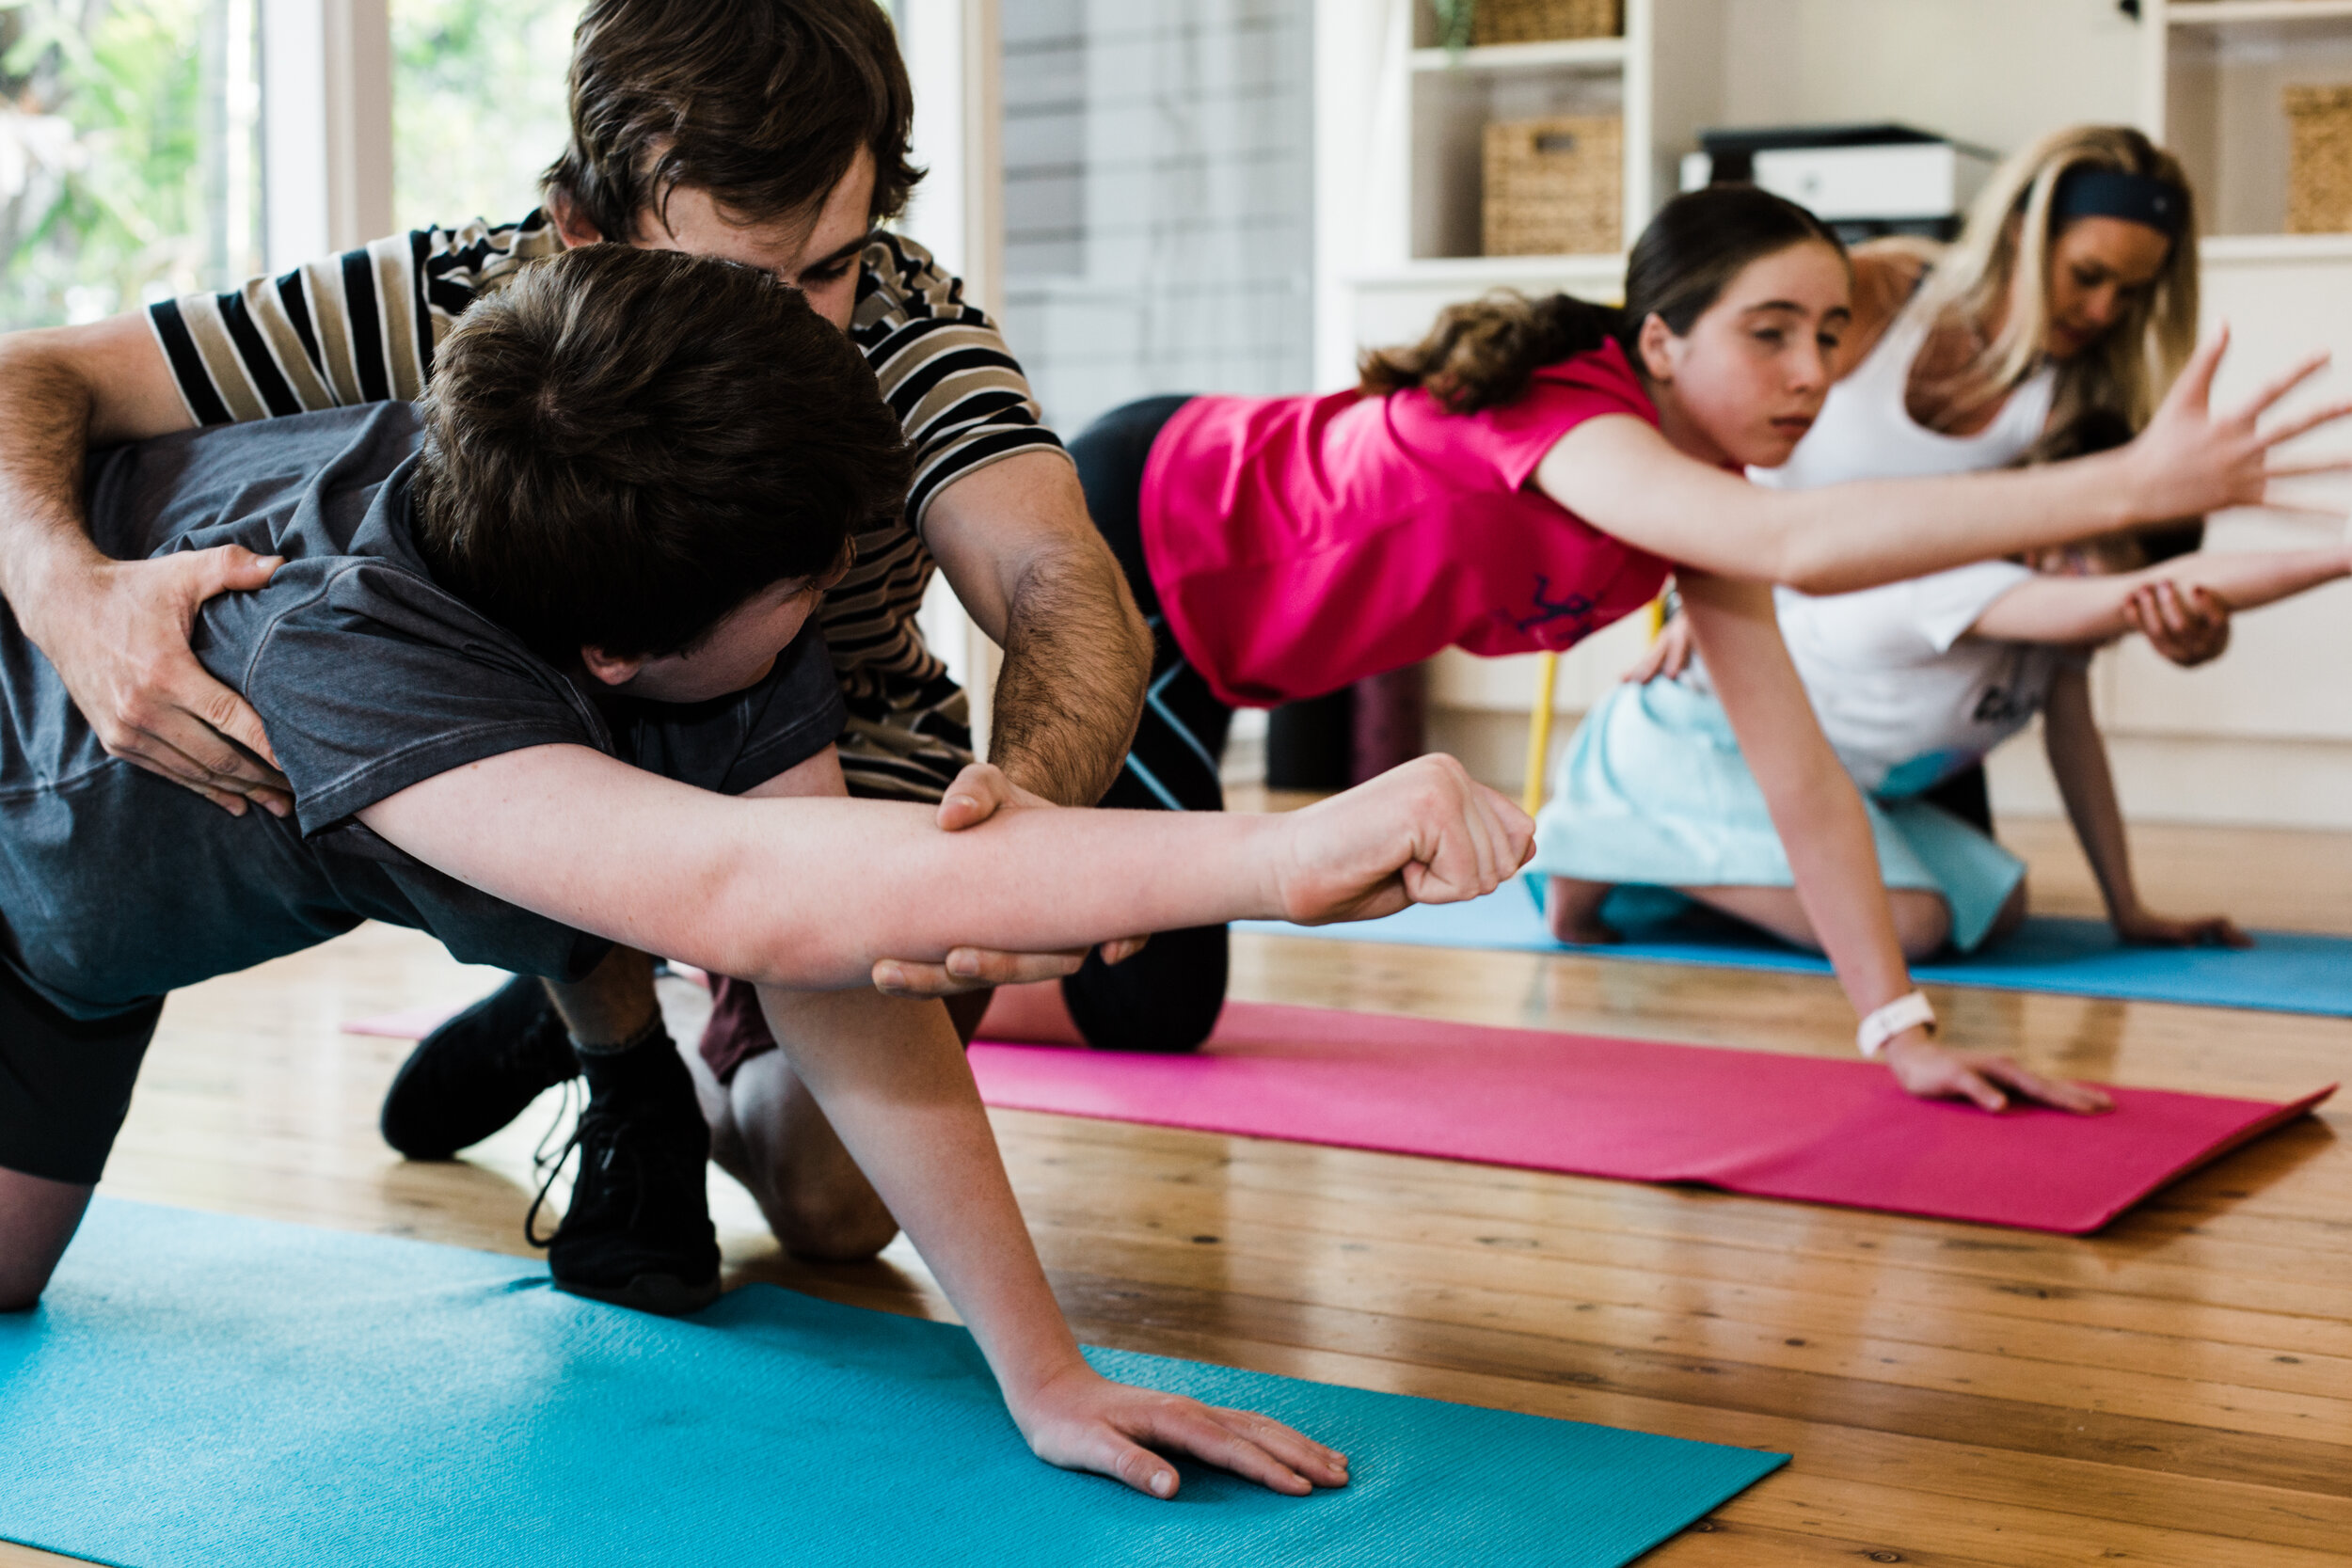 Yoga Based Indoor Activities for Kids With Autism